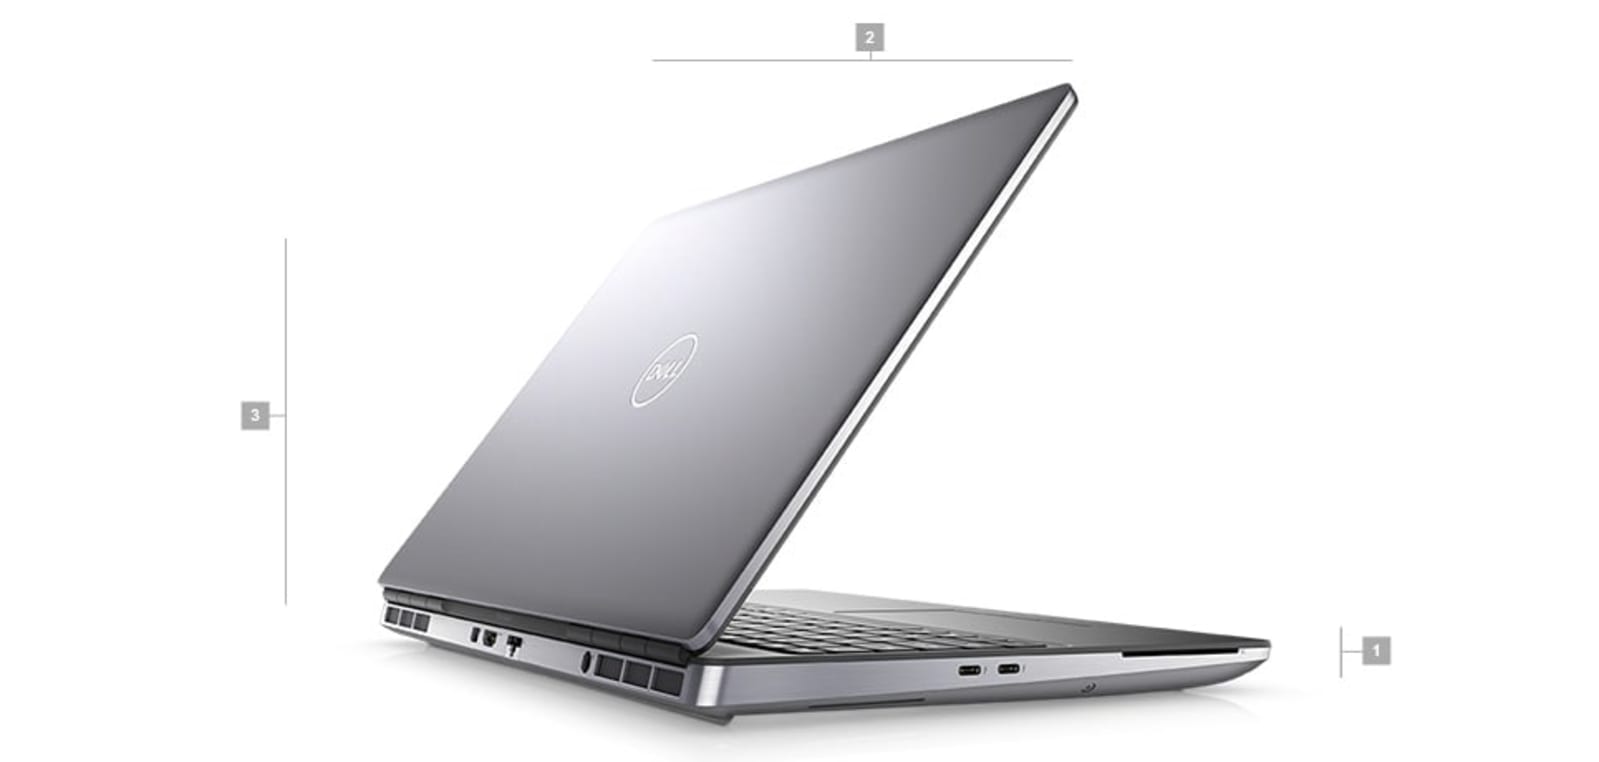 Restored Dell Precision 7000 7560 Workstation Laptop (2021) | 15.6" FHD | Core i5 - 512GB SSD - 64GB RAM - Nvidia T1200 | 6 Cores @ 4.6 GHz - 11th Gen CPU (Refurbished) - image 1 of 11